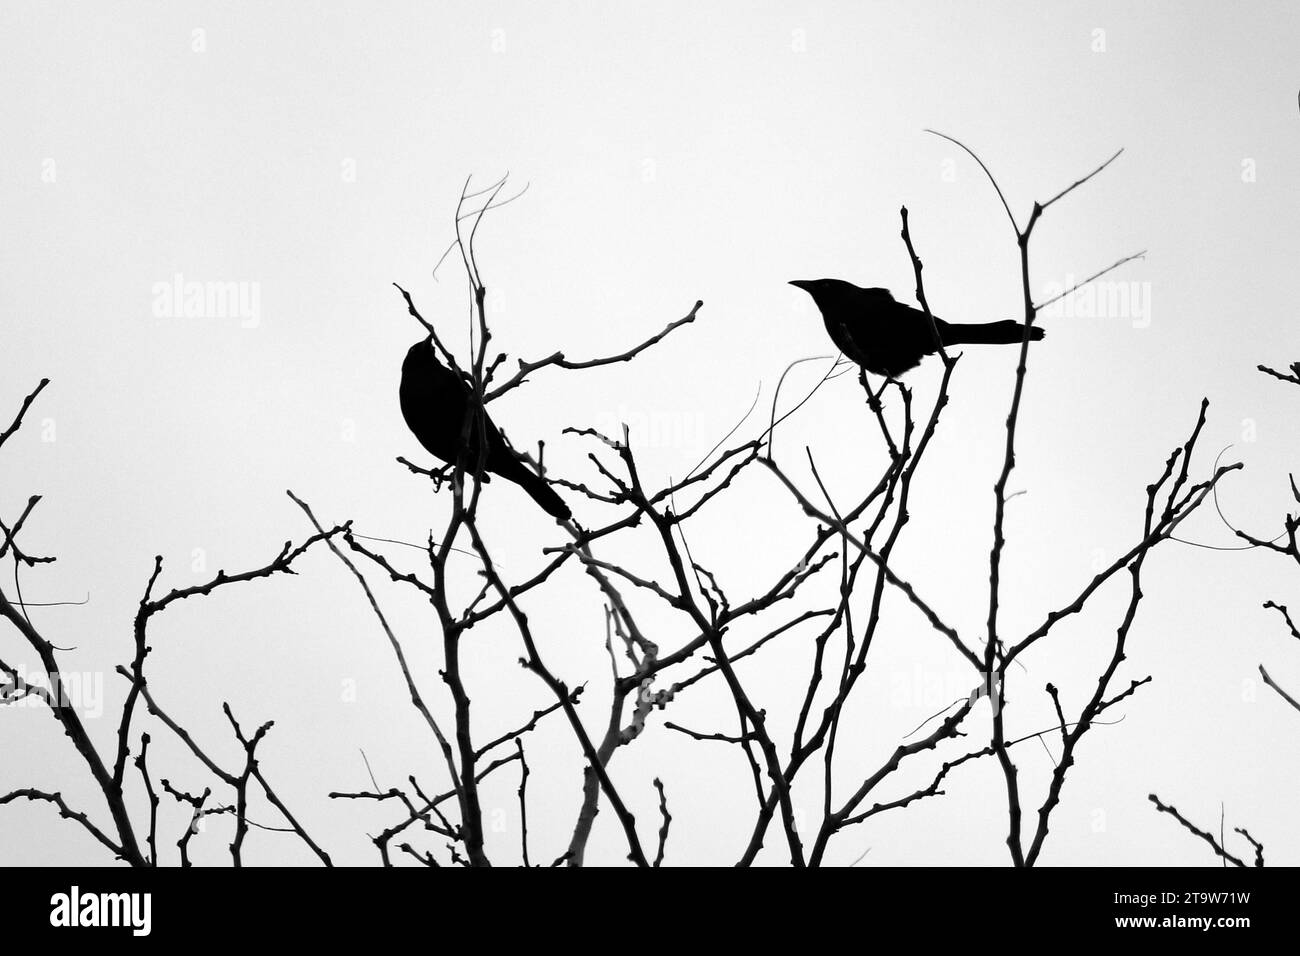 Two birds perched on the top of tree branches silhouetted against a bright orange and yellow sky as the sun sets Stock Photo